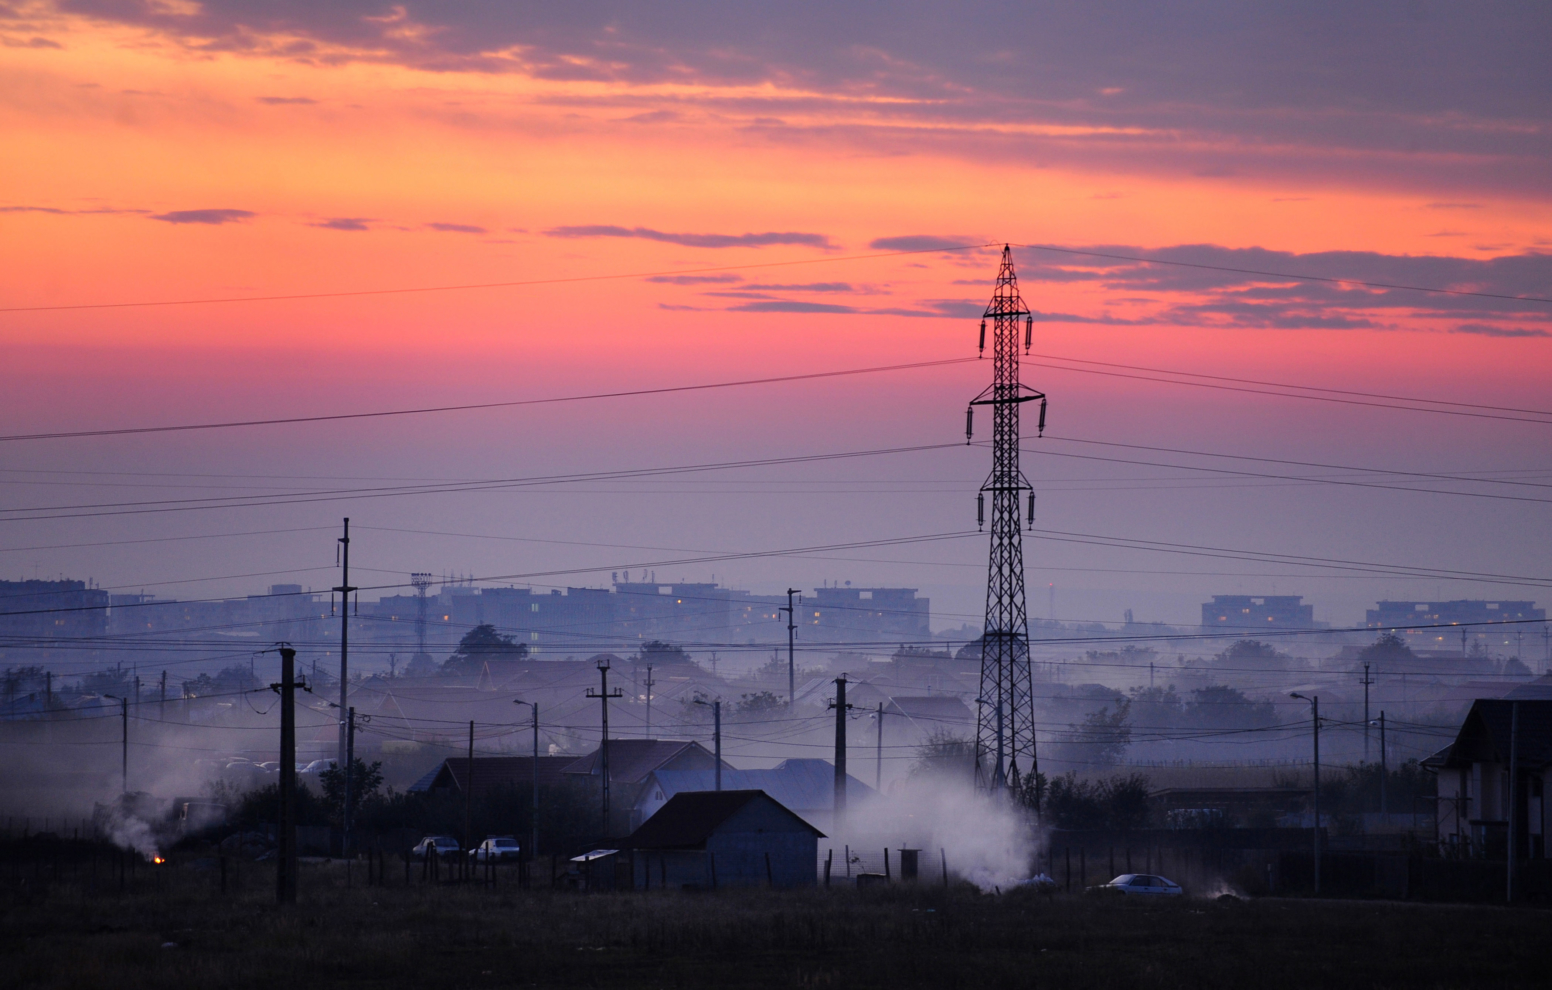 Electrical powerlines are seen abovehouses at sunset in Craiova city, some 240kms west of Bucharest on October 10, 2010. AFP PHOTO DANIEL MIHAILESCU (Photo by Daniel MIHAILESCU / AFP) (Photo by DANIEL MIHAILESCU/AFP via Getty Images)